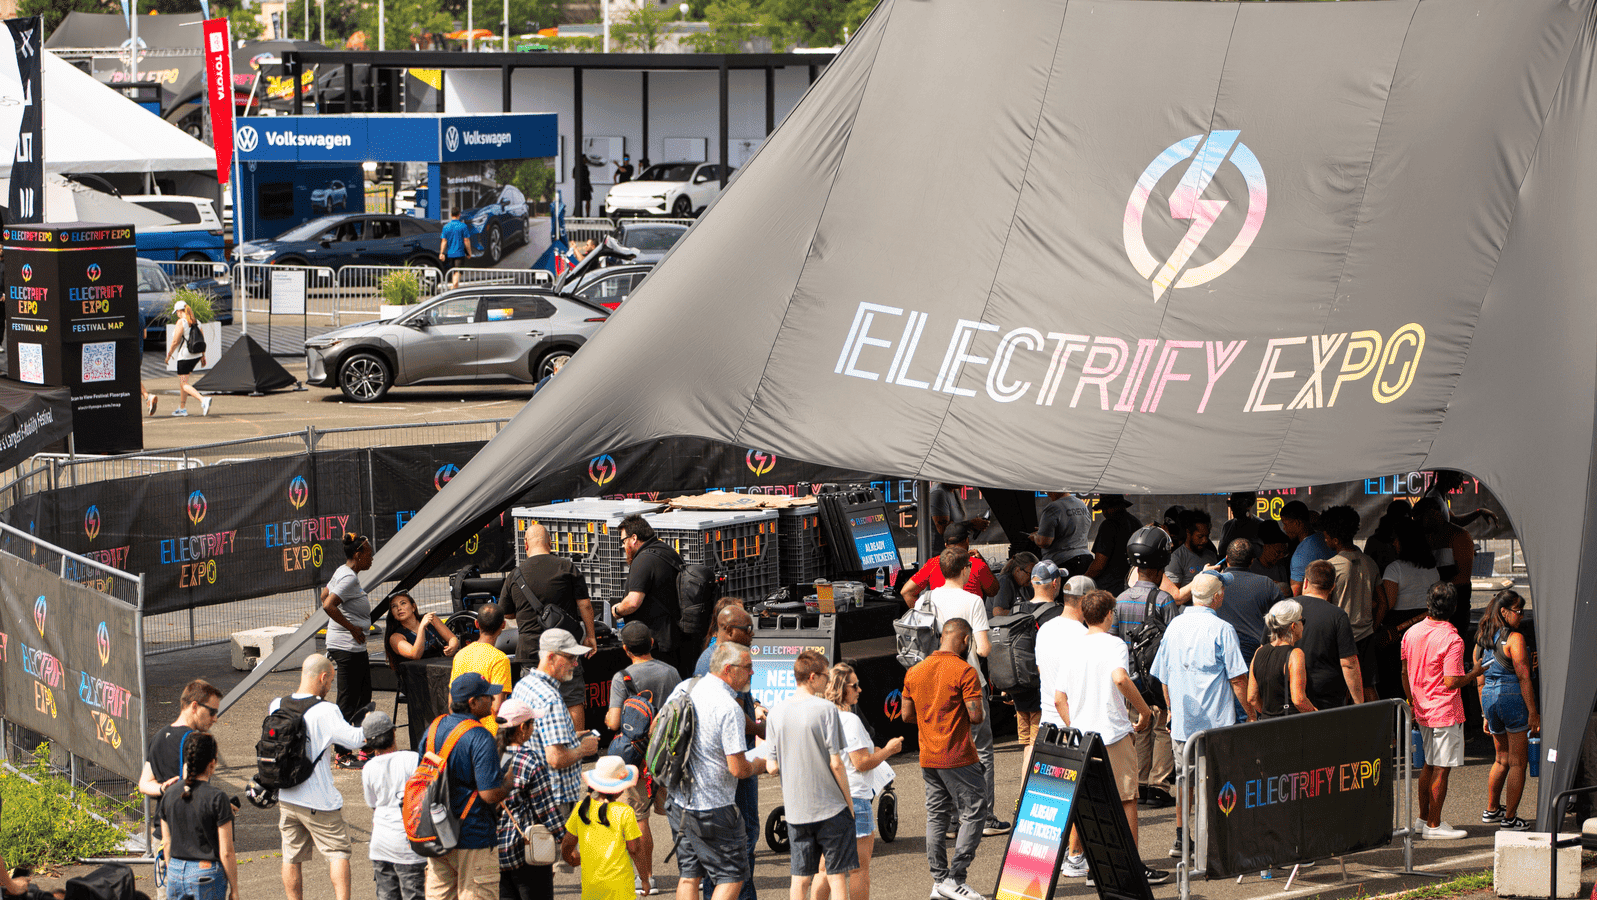 Photo of Electrify Expo in Washington DC. Over 13,000 demo rides! Attendees walking into the entrance of the show.